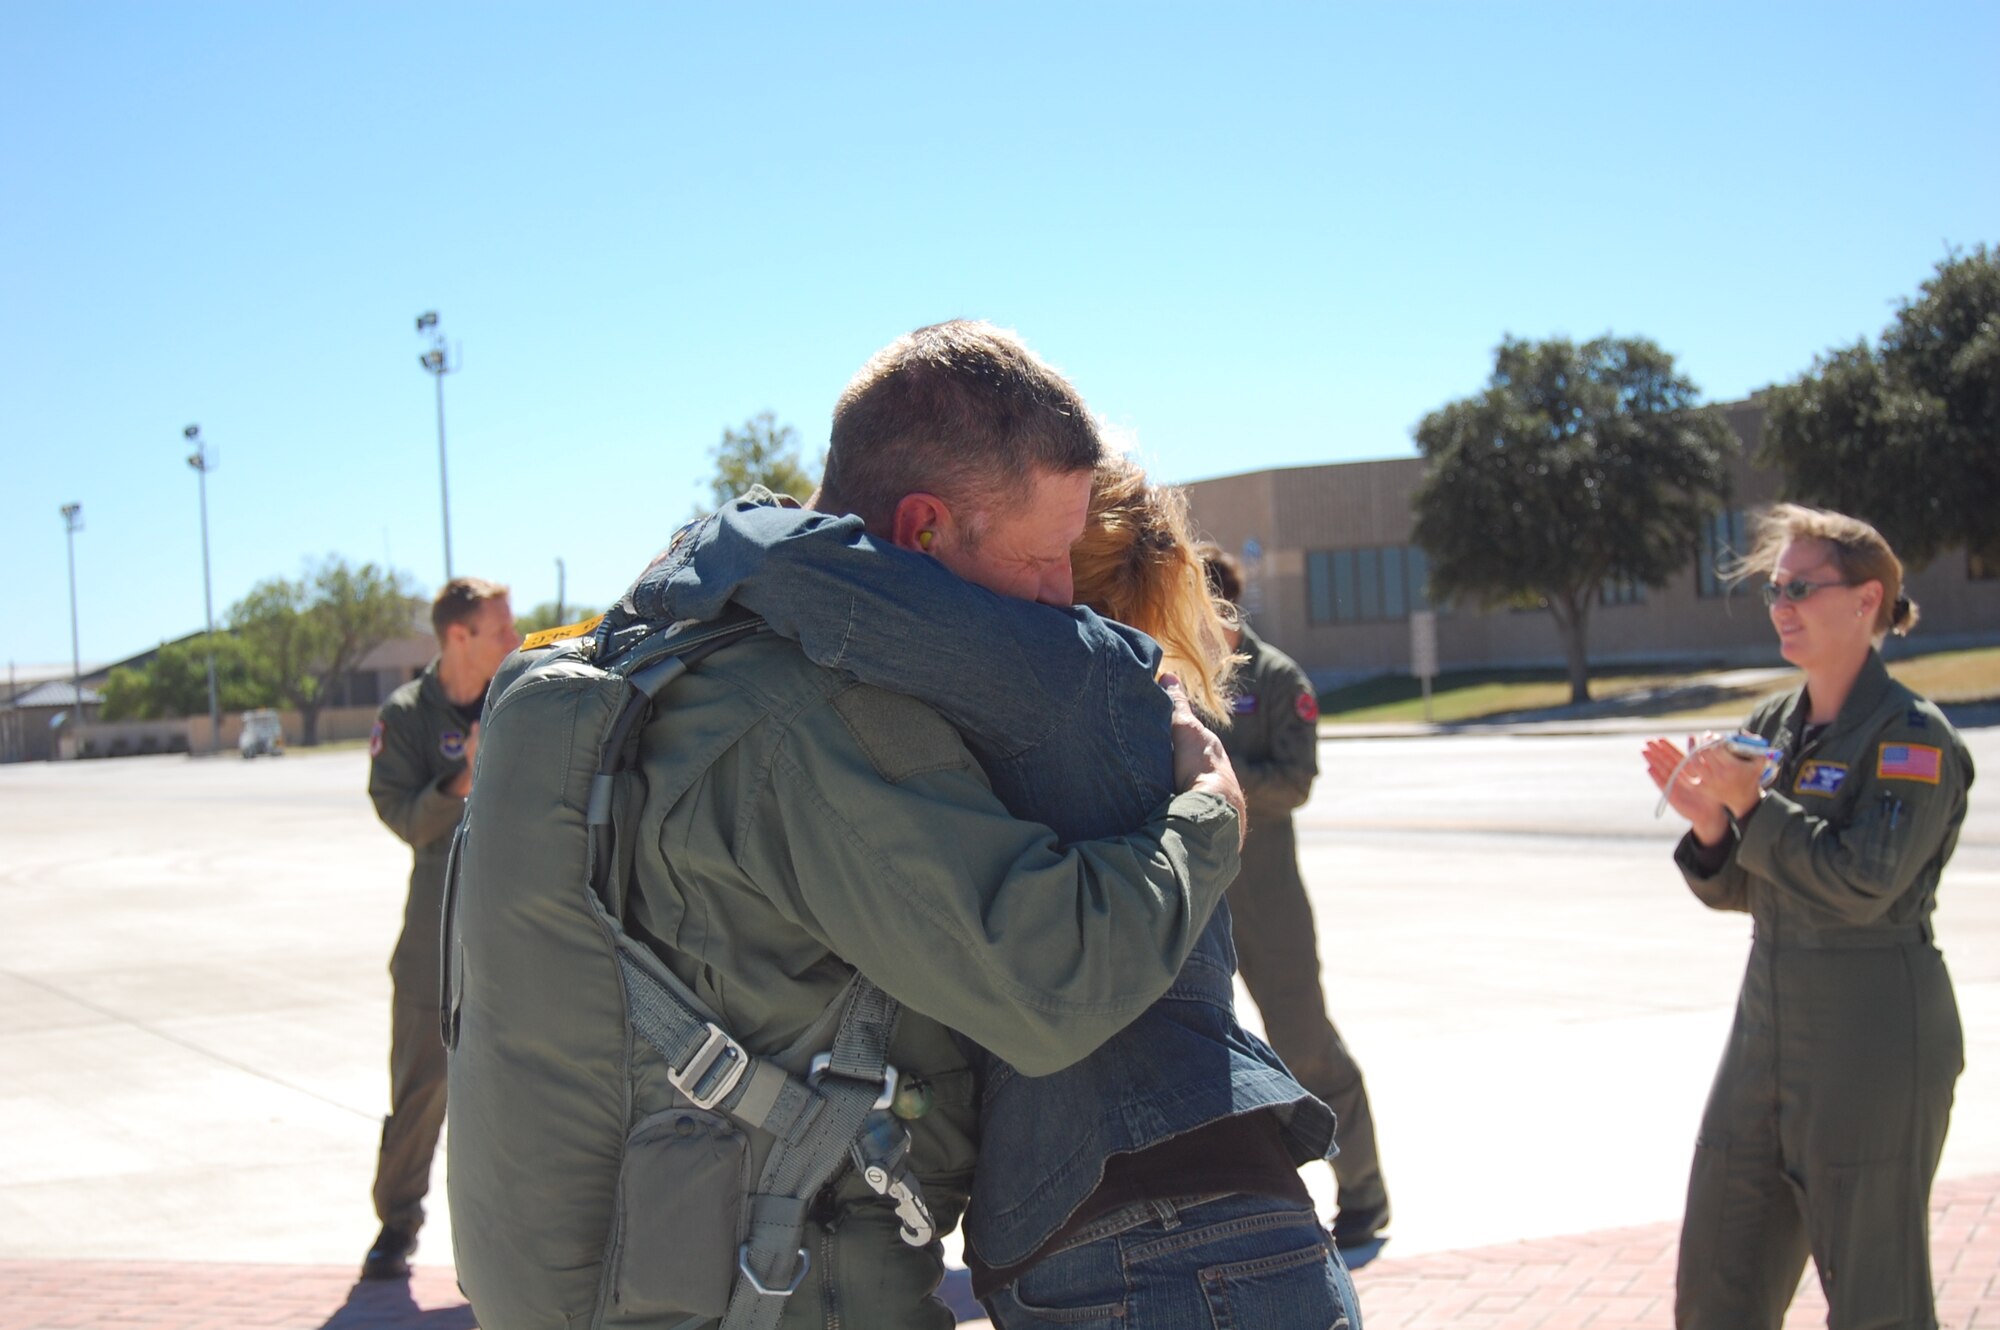 LAUGHLIN AIR FORCE BASE, Texas – After landing from his 2,000th T-38 flying hour, vice wing commander Col. Laro Clark hugs his wife, Susan. The colonel adds this personal flying milestone to many others including service on the East Coast F-15 Aerial Demonstration Team, rating as a Euro-NATO Joint Jet Pilot and 220 combat hours in the F-15. The colonel will deploy in January 2008 in support of the Global War on Terror. (U.S. Air Force Photo/Airman Sara Csurilla)